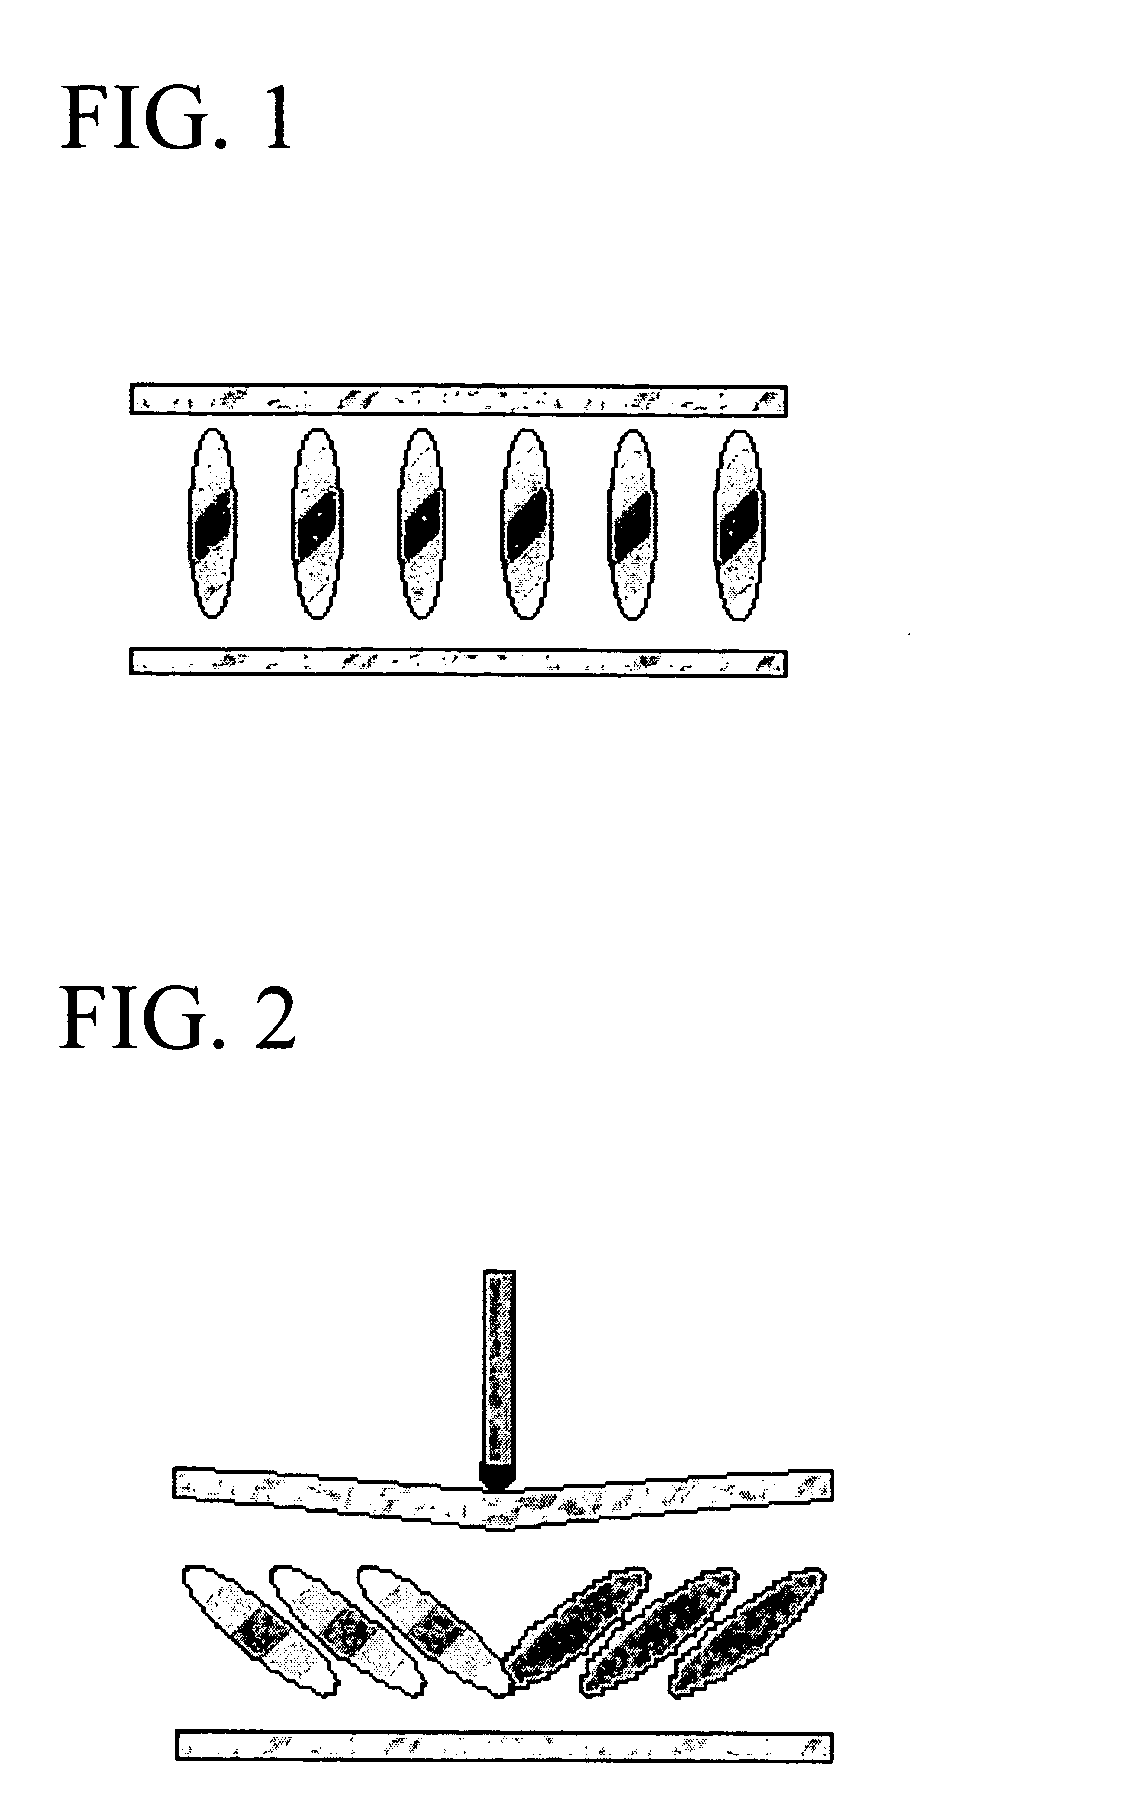 Liquid crystal display device having touch screen function and method of fabricating the same